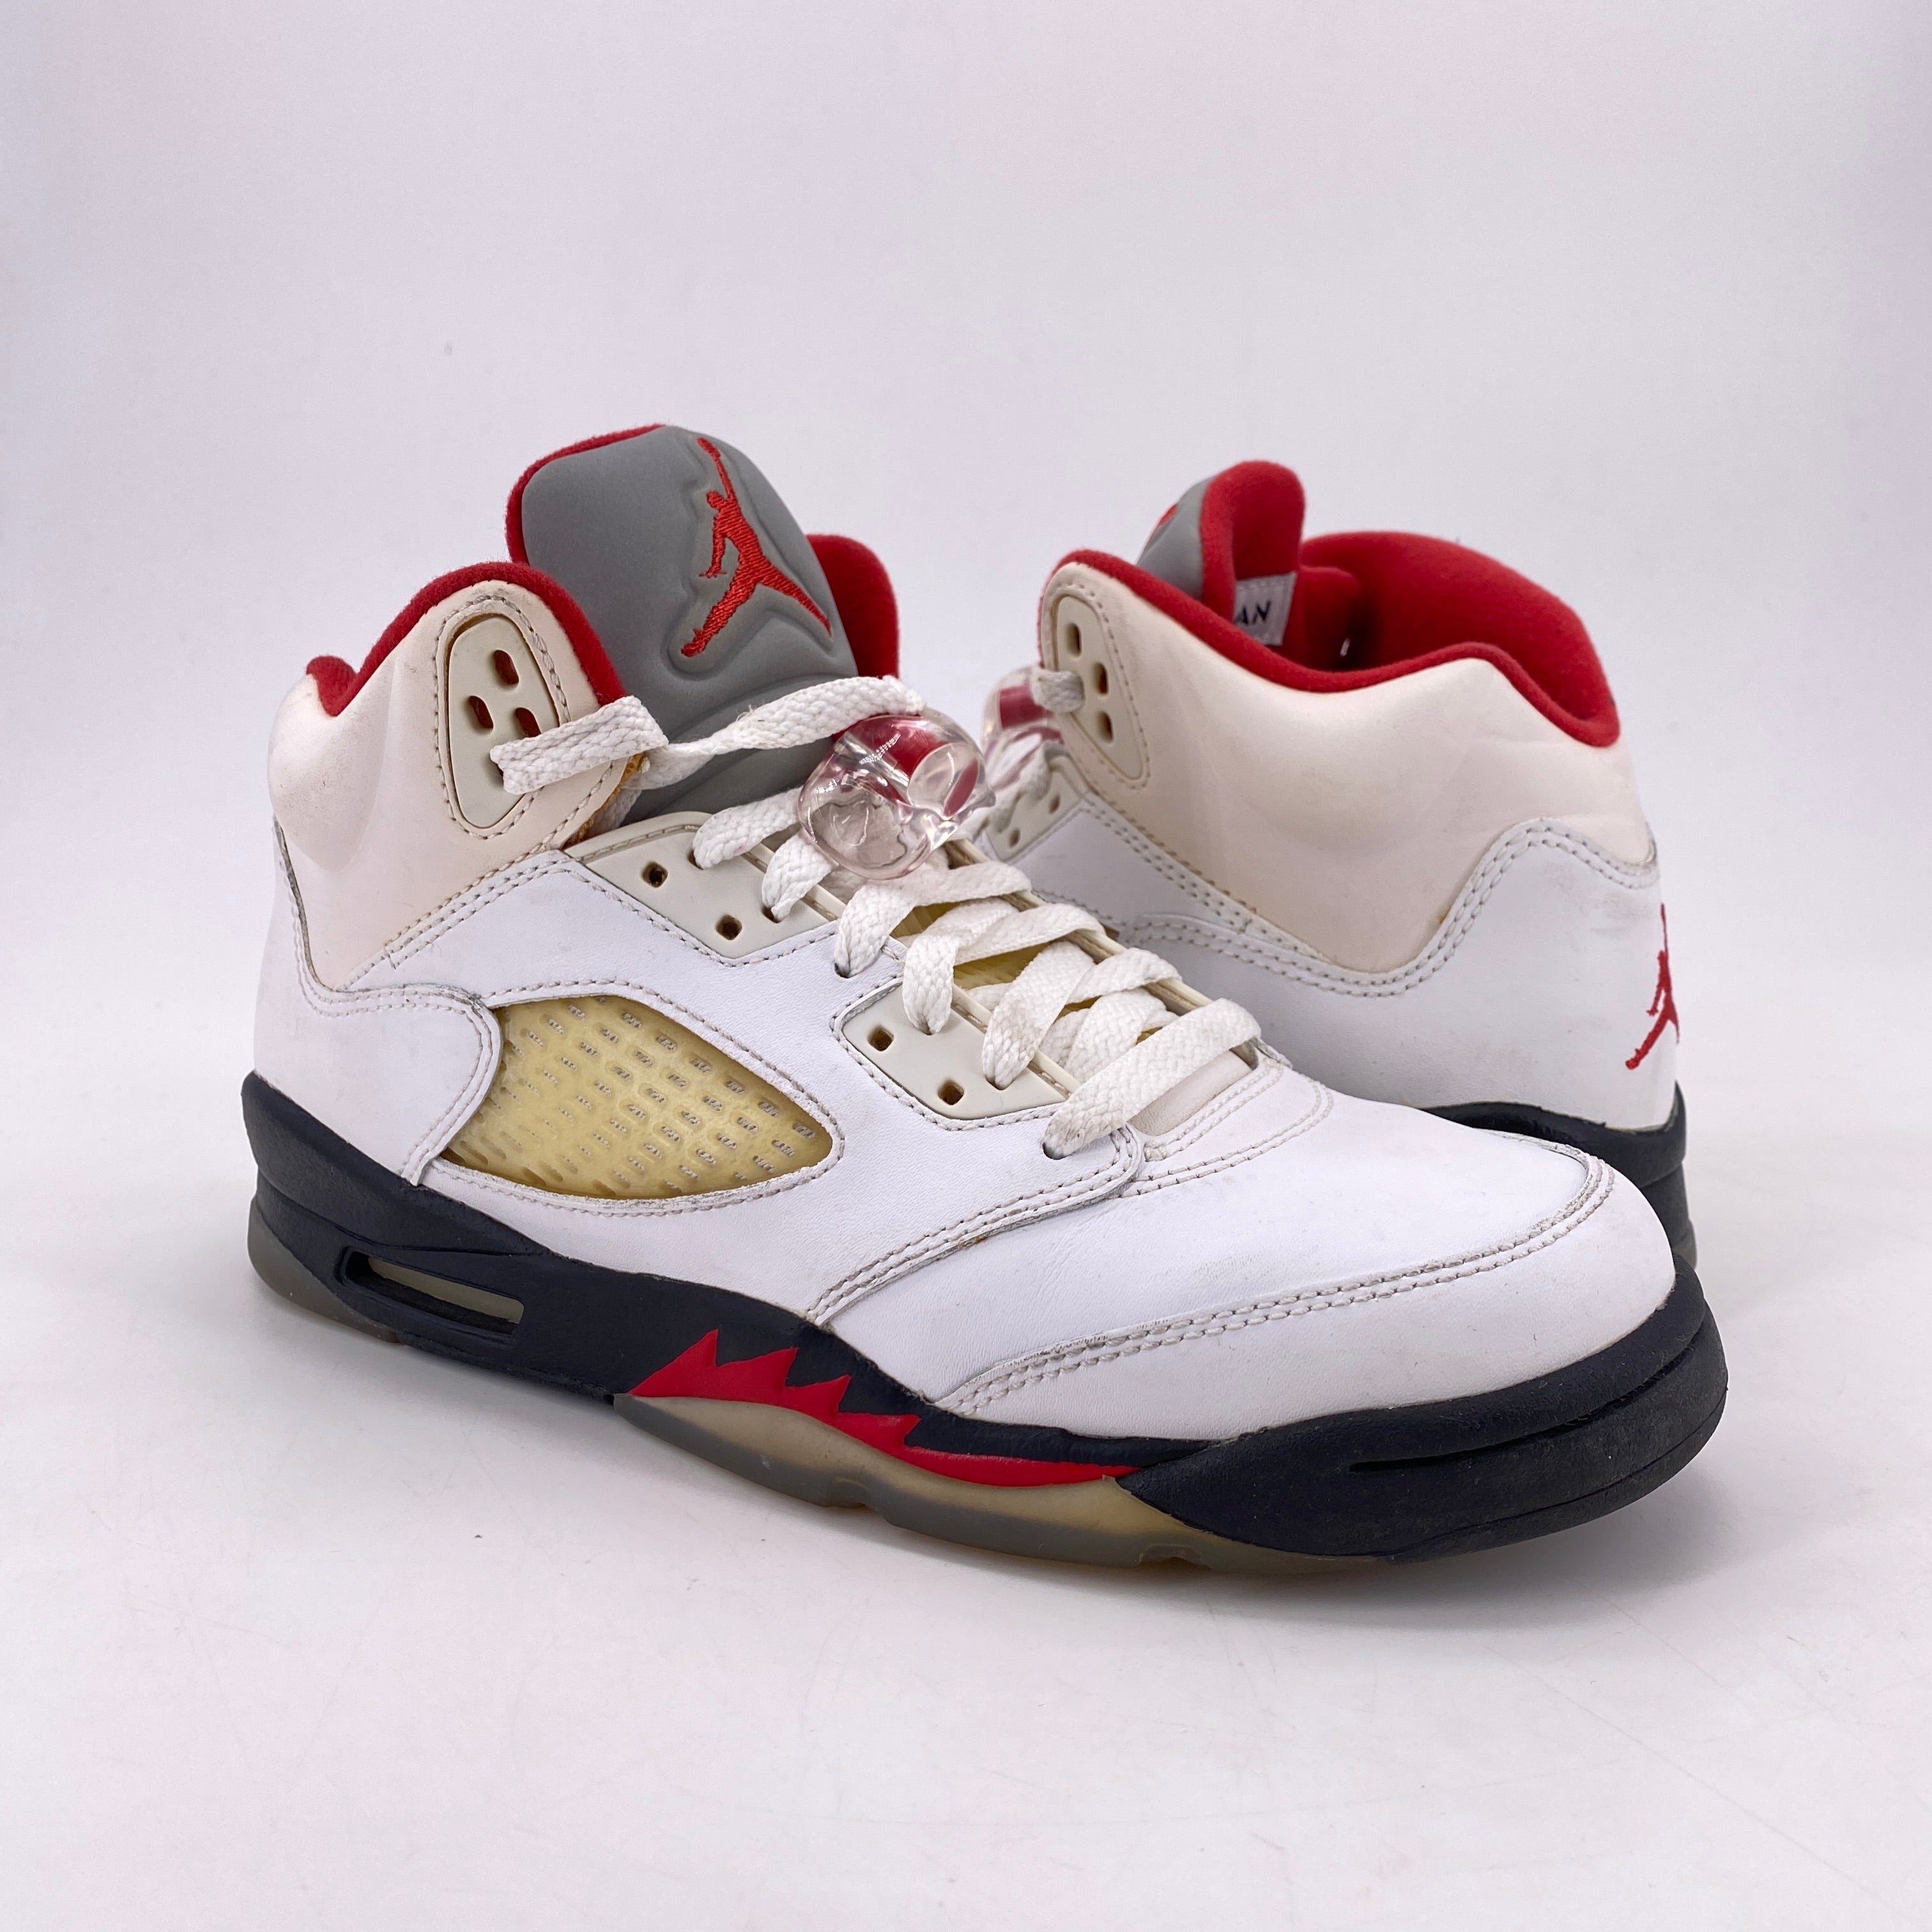 Air Jordan (GS) 5 Retro "Fire Red" 2013 Used Size 5.5Y